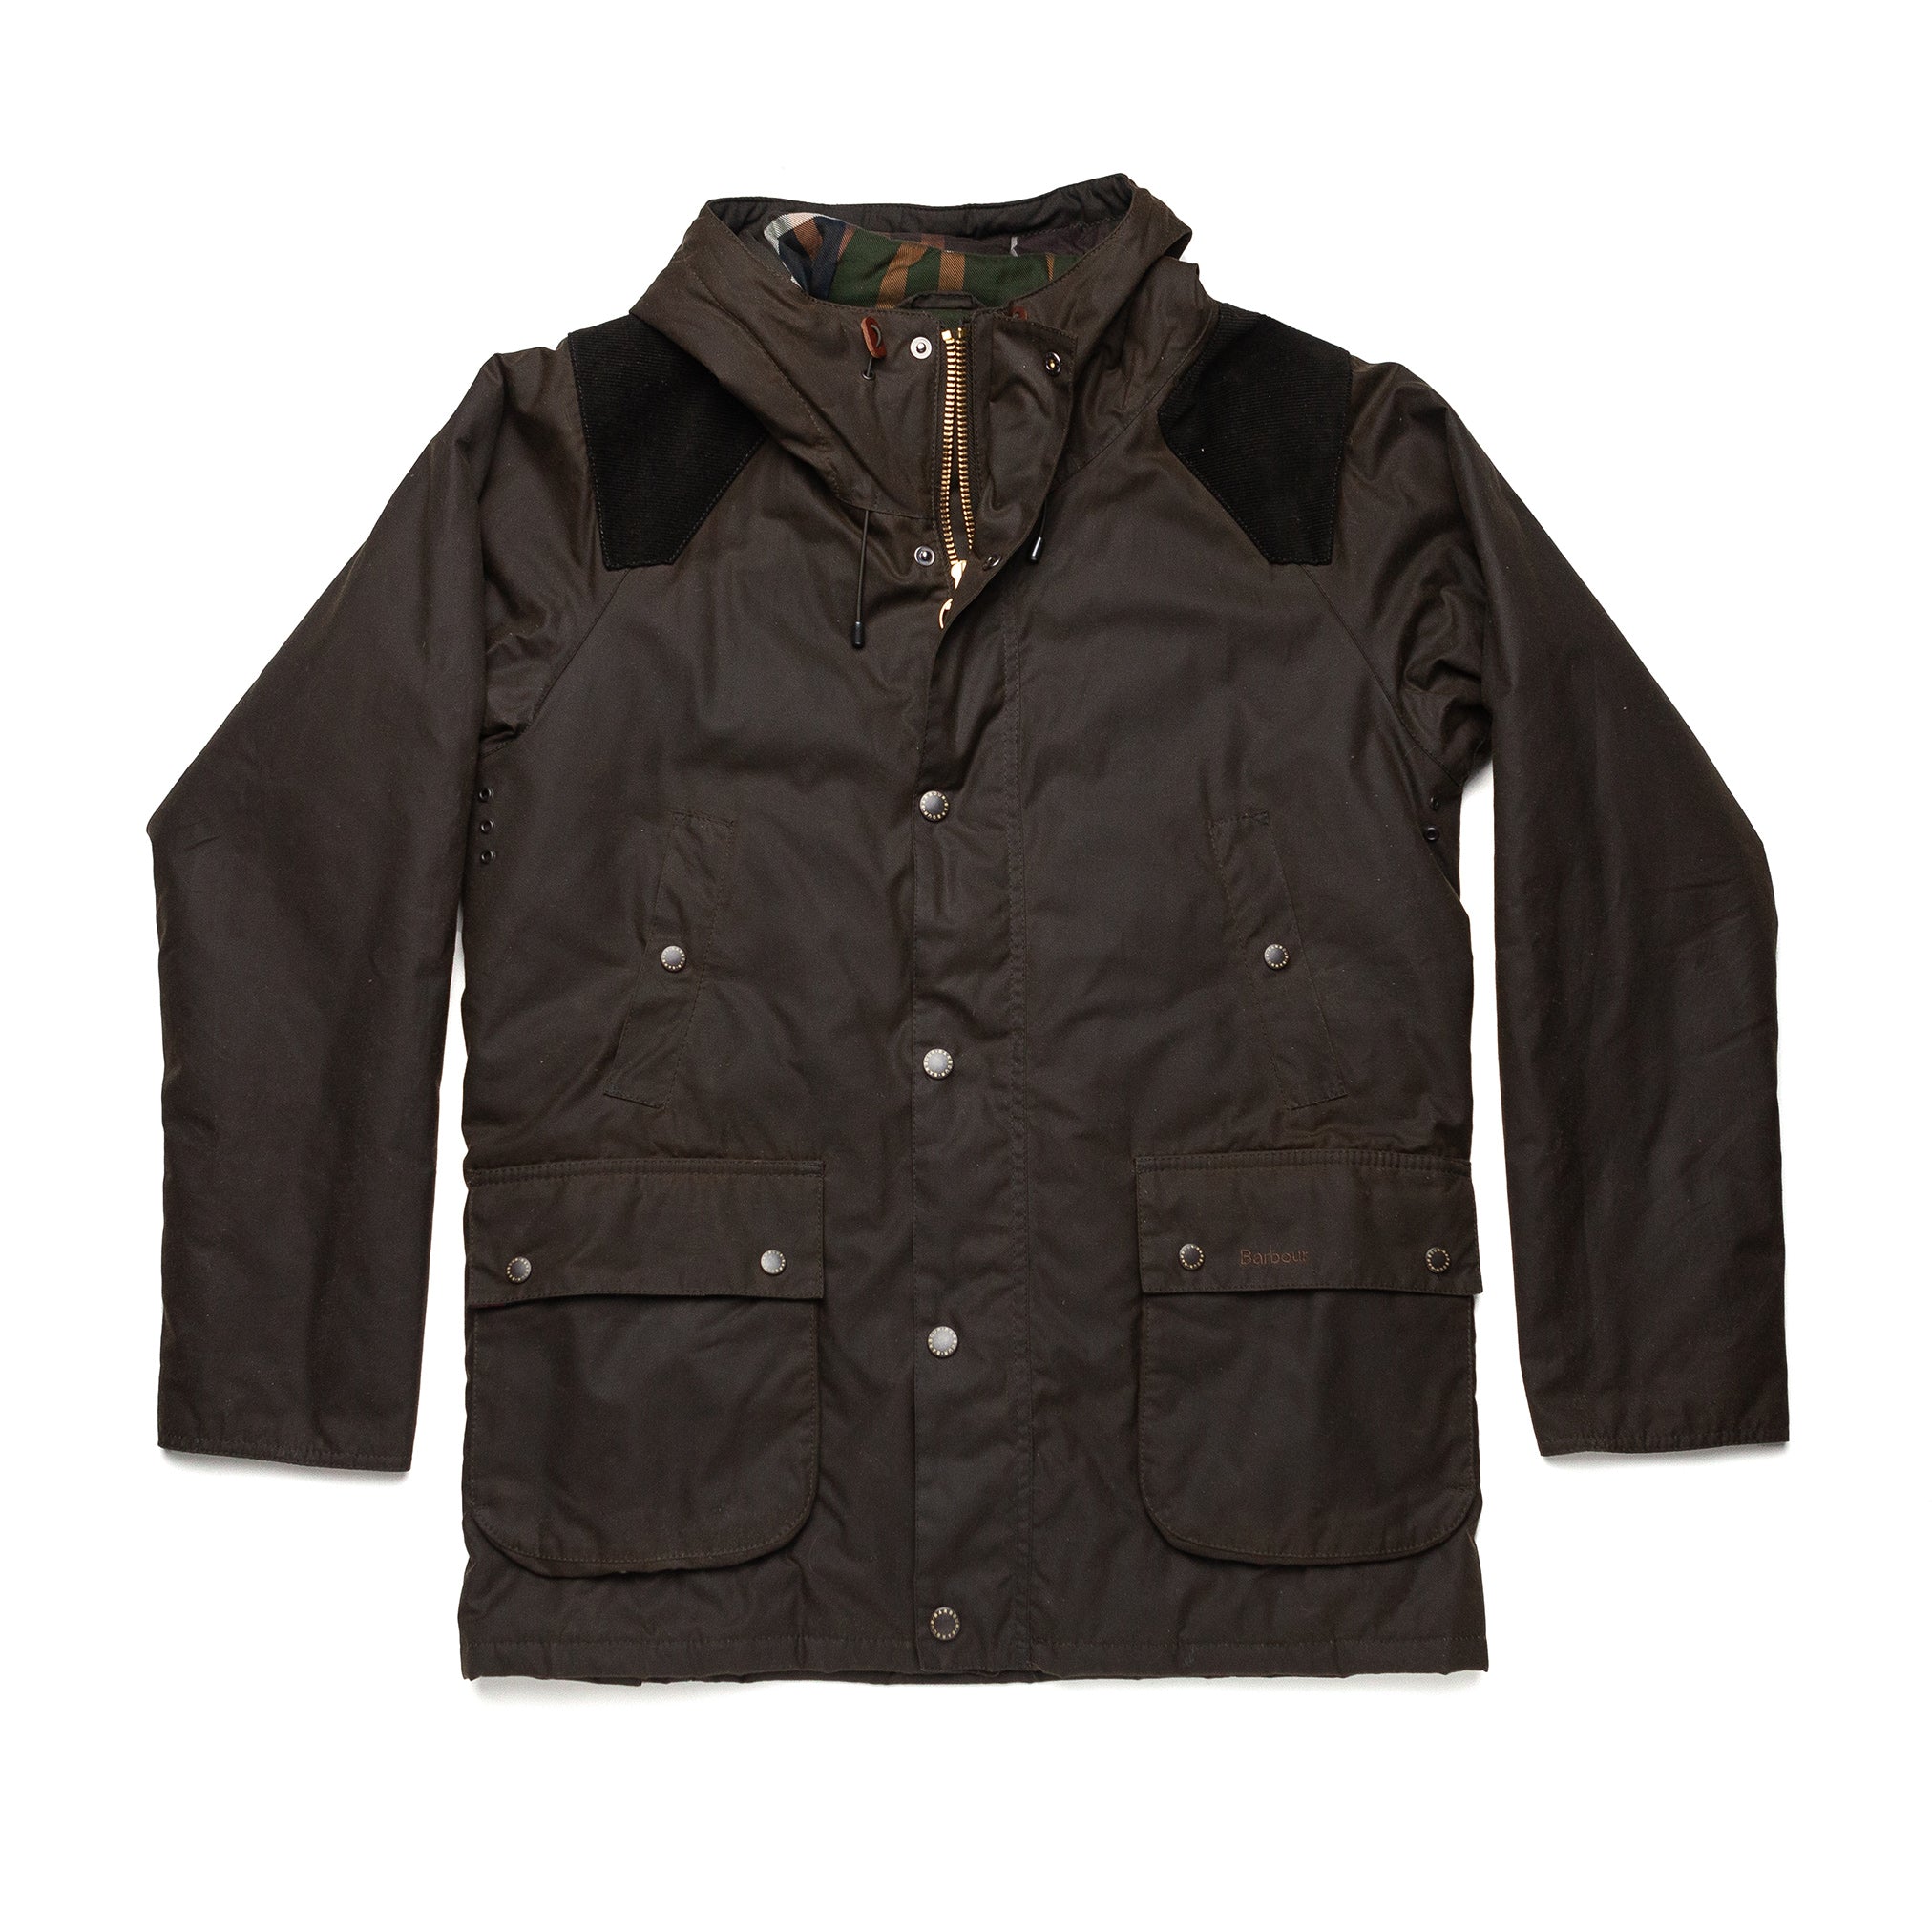 Barbour Louth - Large